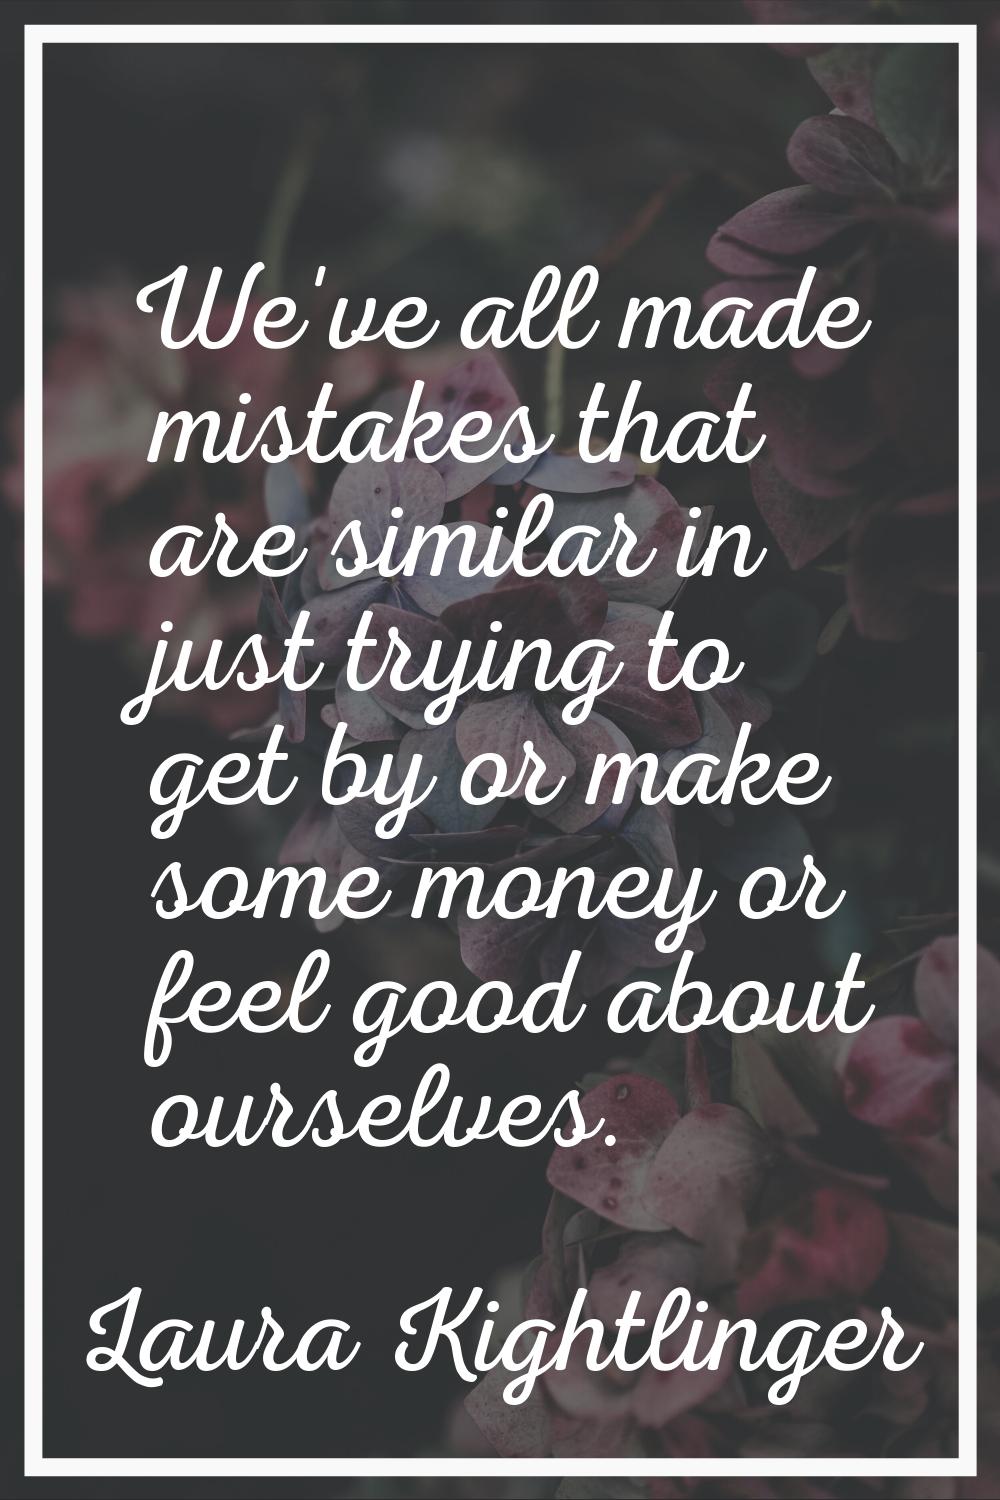 We've all made mistakes that are similar in just trying to get by or make some money or feel good a